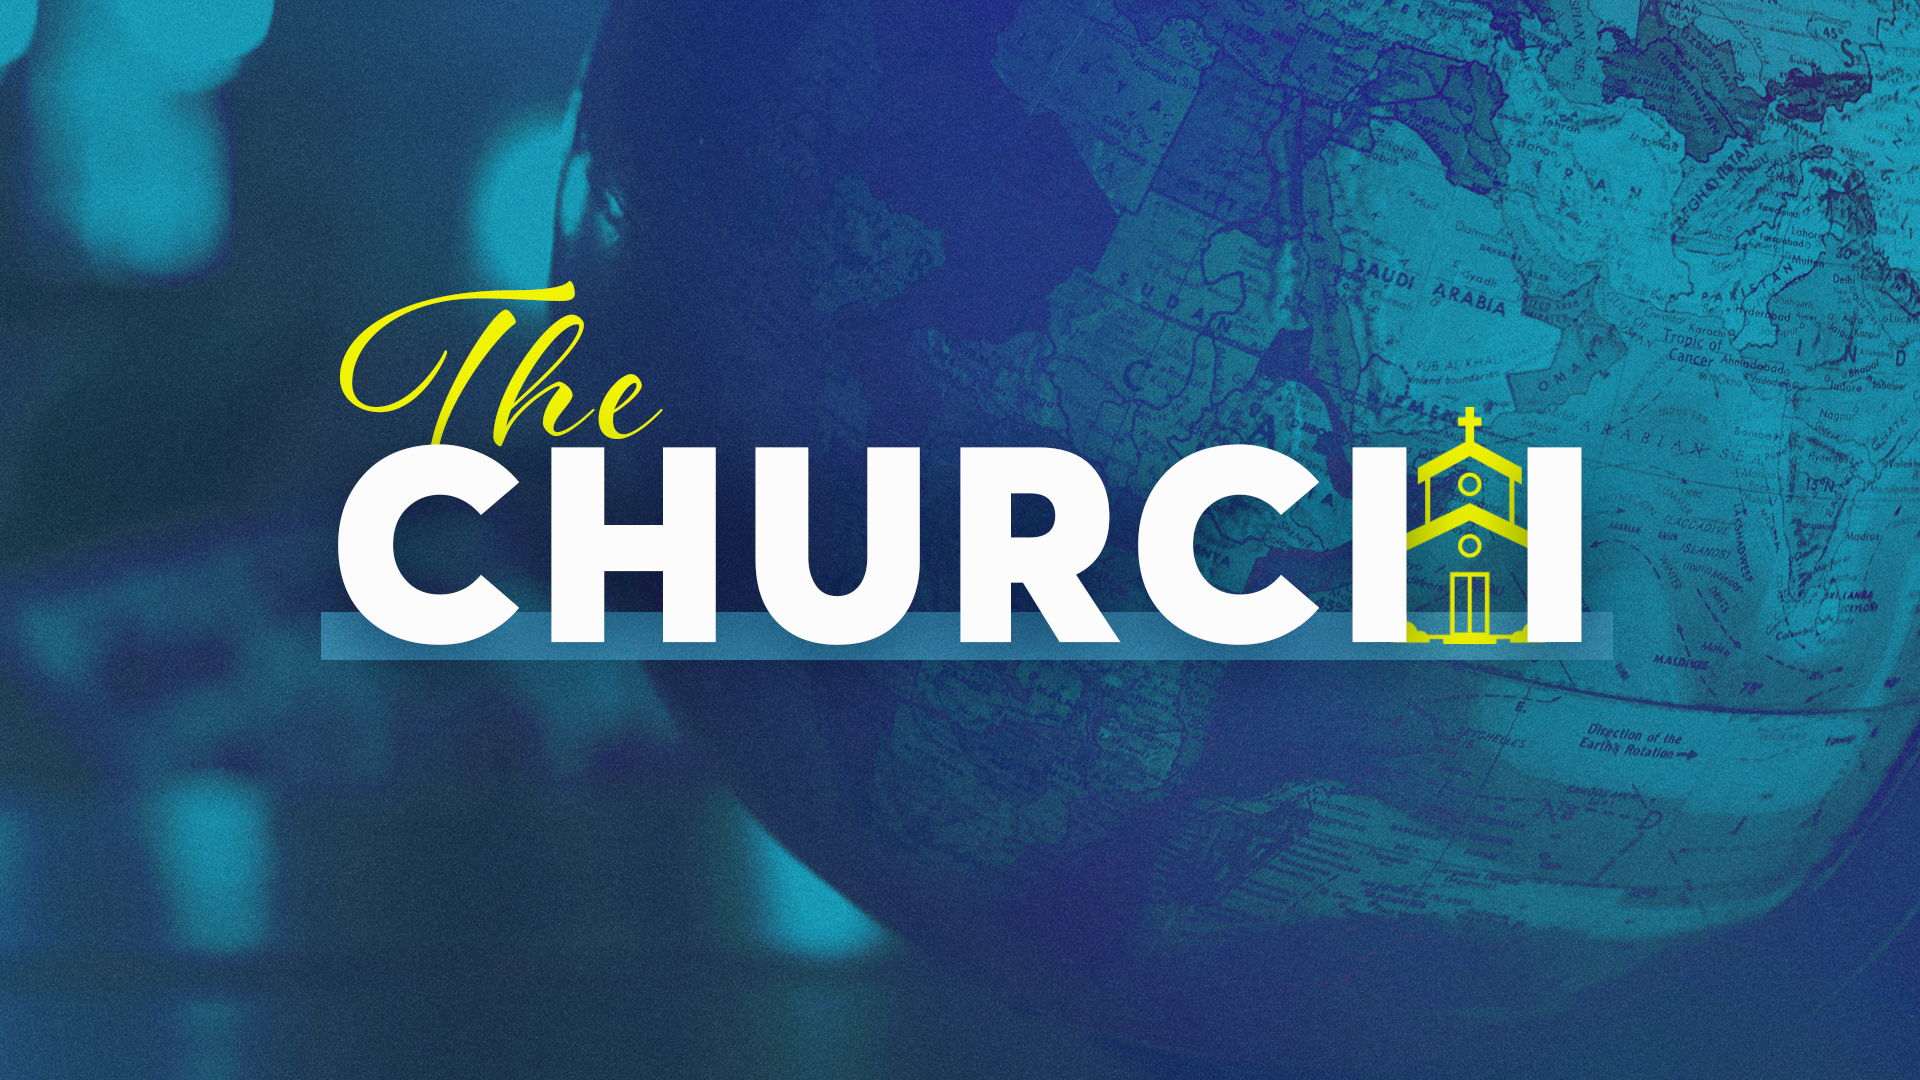 Featured image for “The Church”